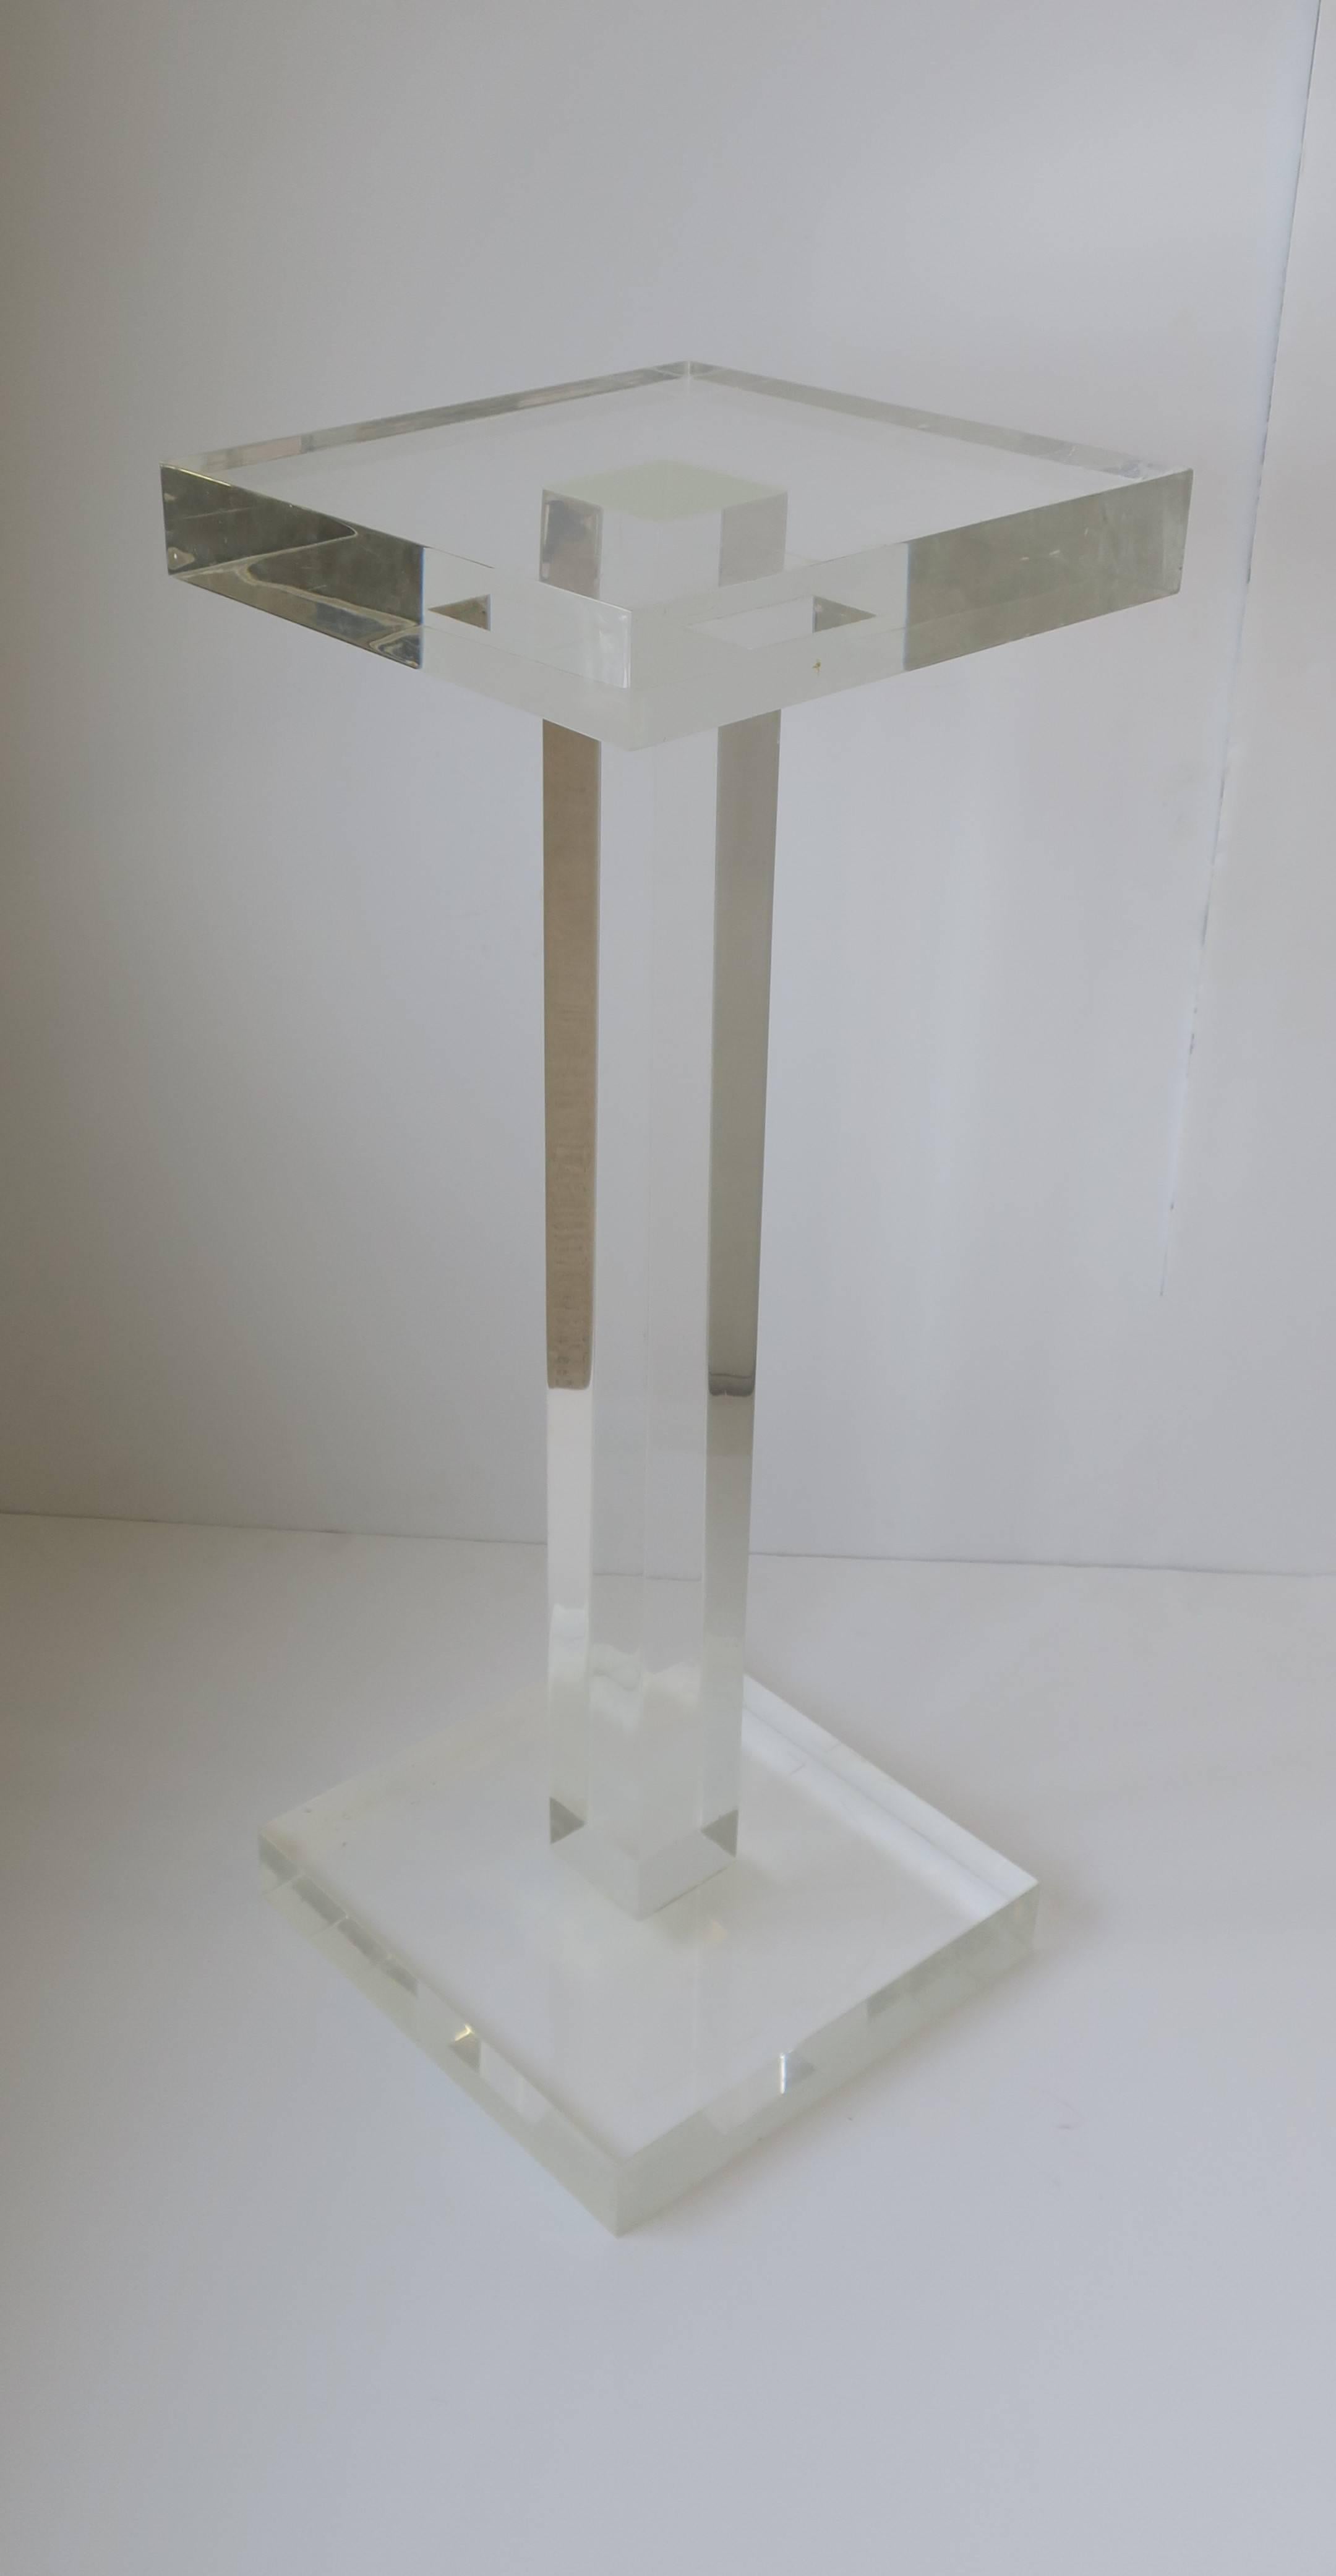 A substantial square Modern style Lucite pedestal or column stand.

Measurements include: 
Pedestal is 32